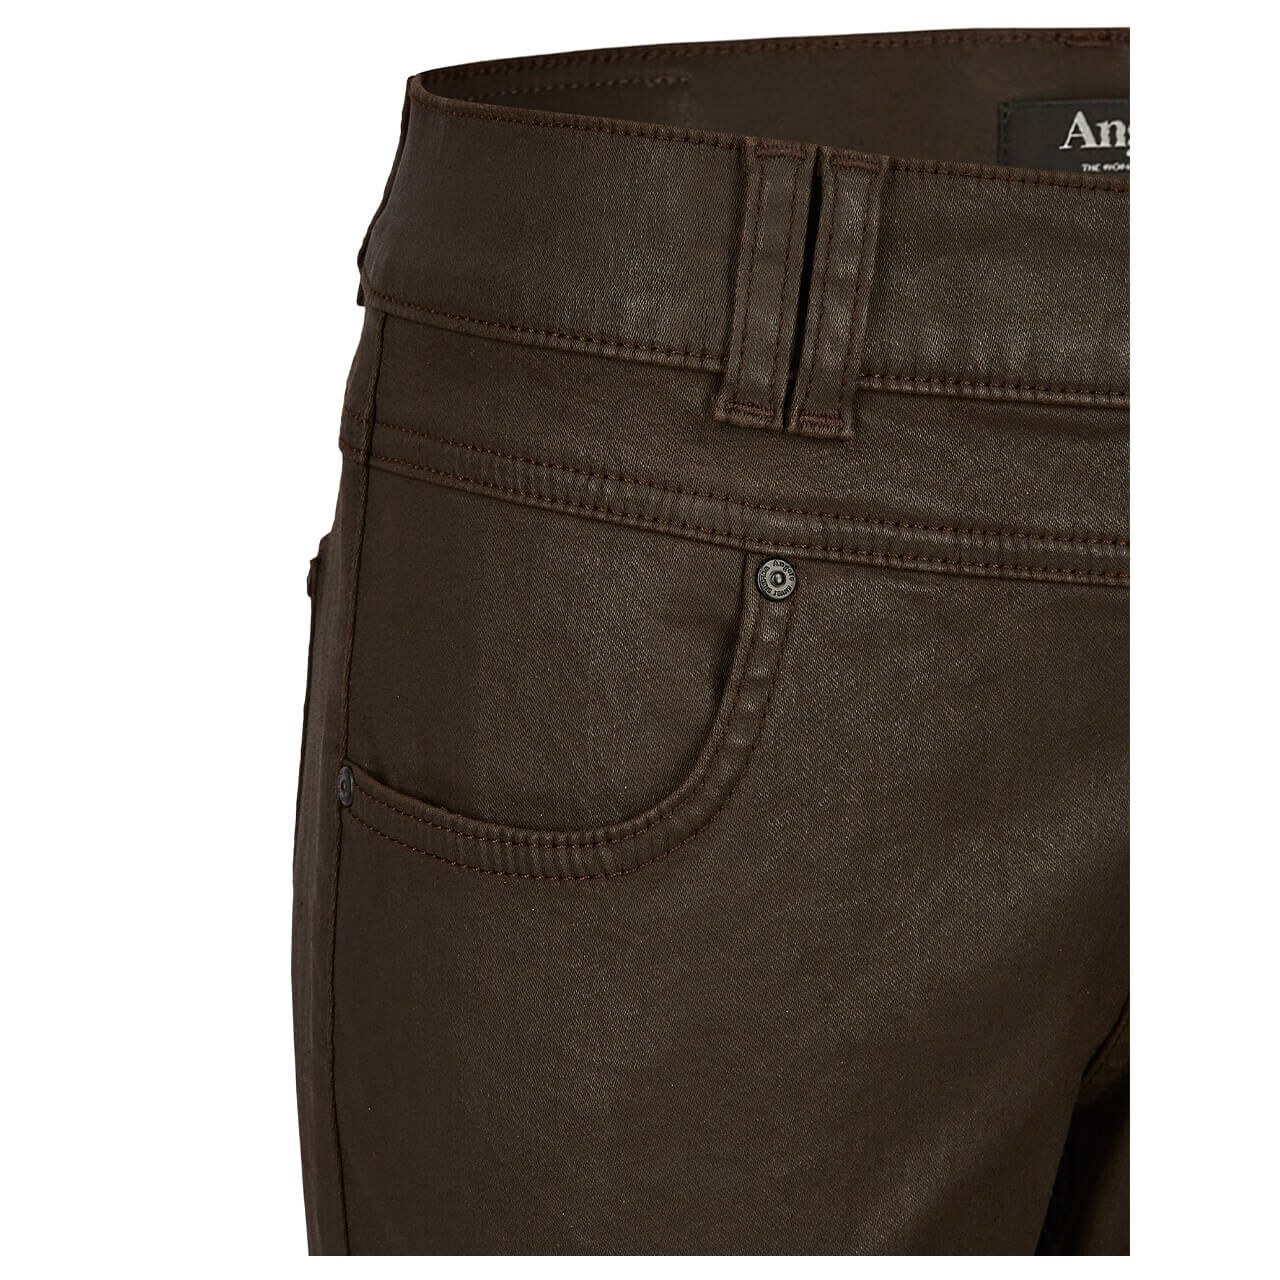 Angels Skinny Button Jeans dark chocolate coated